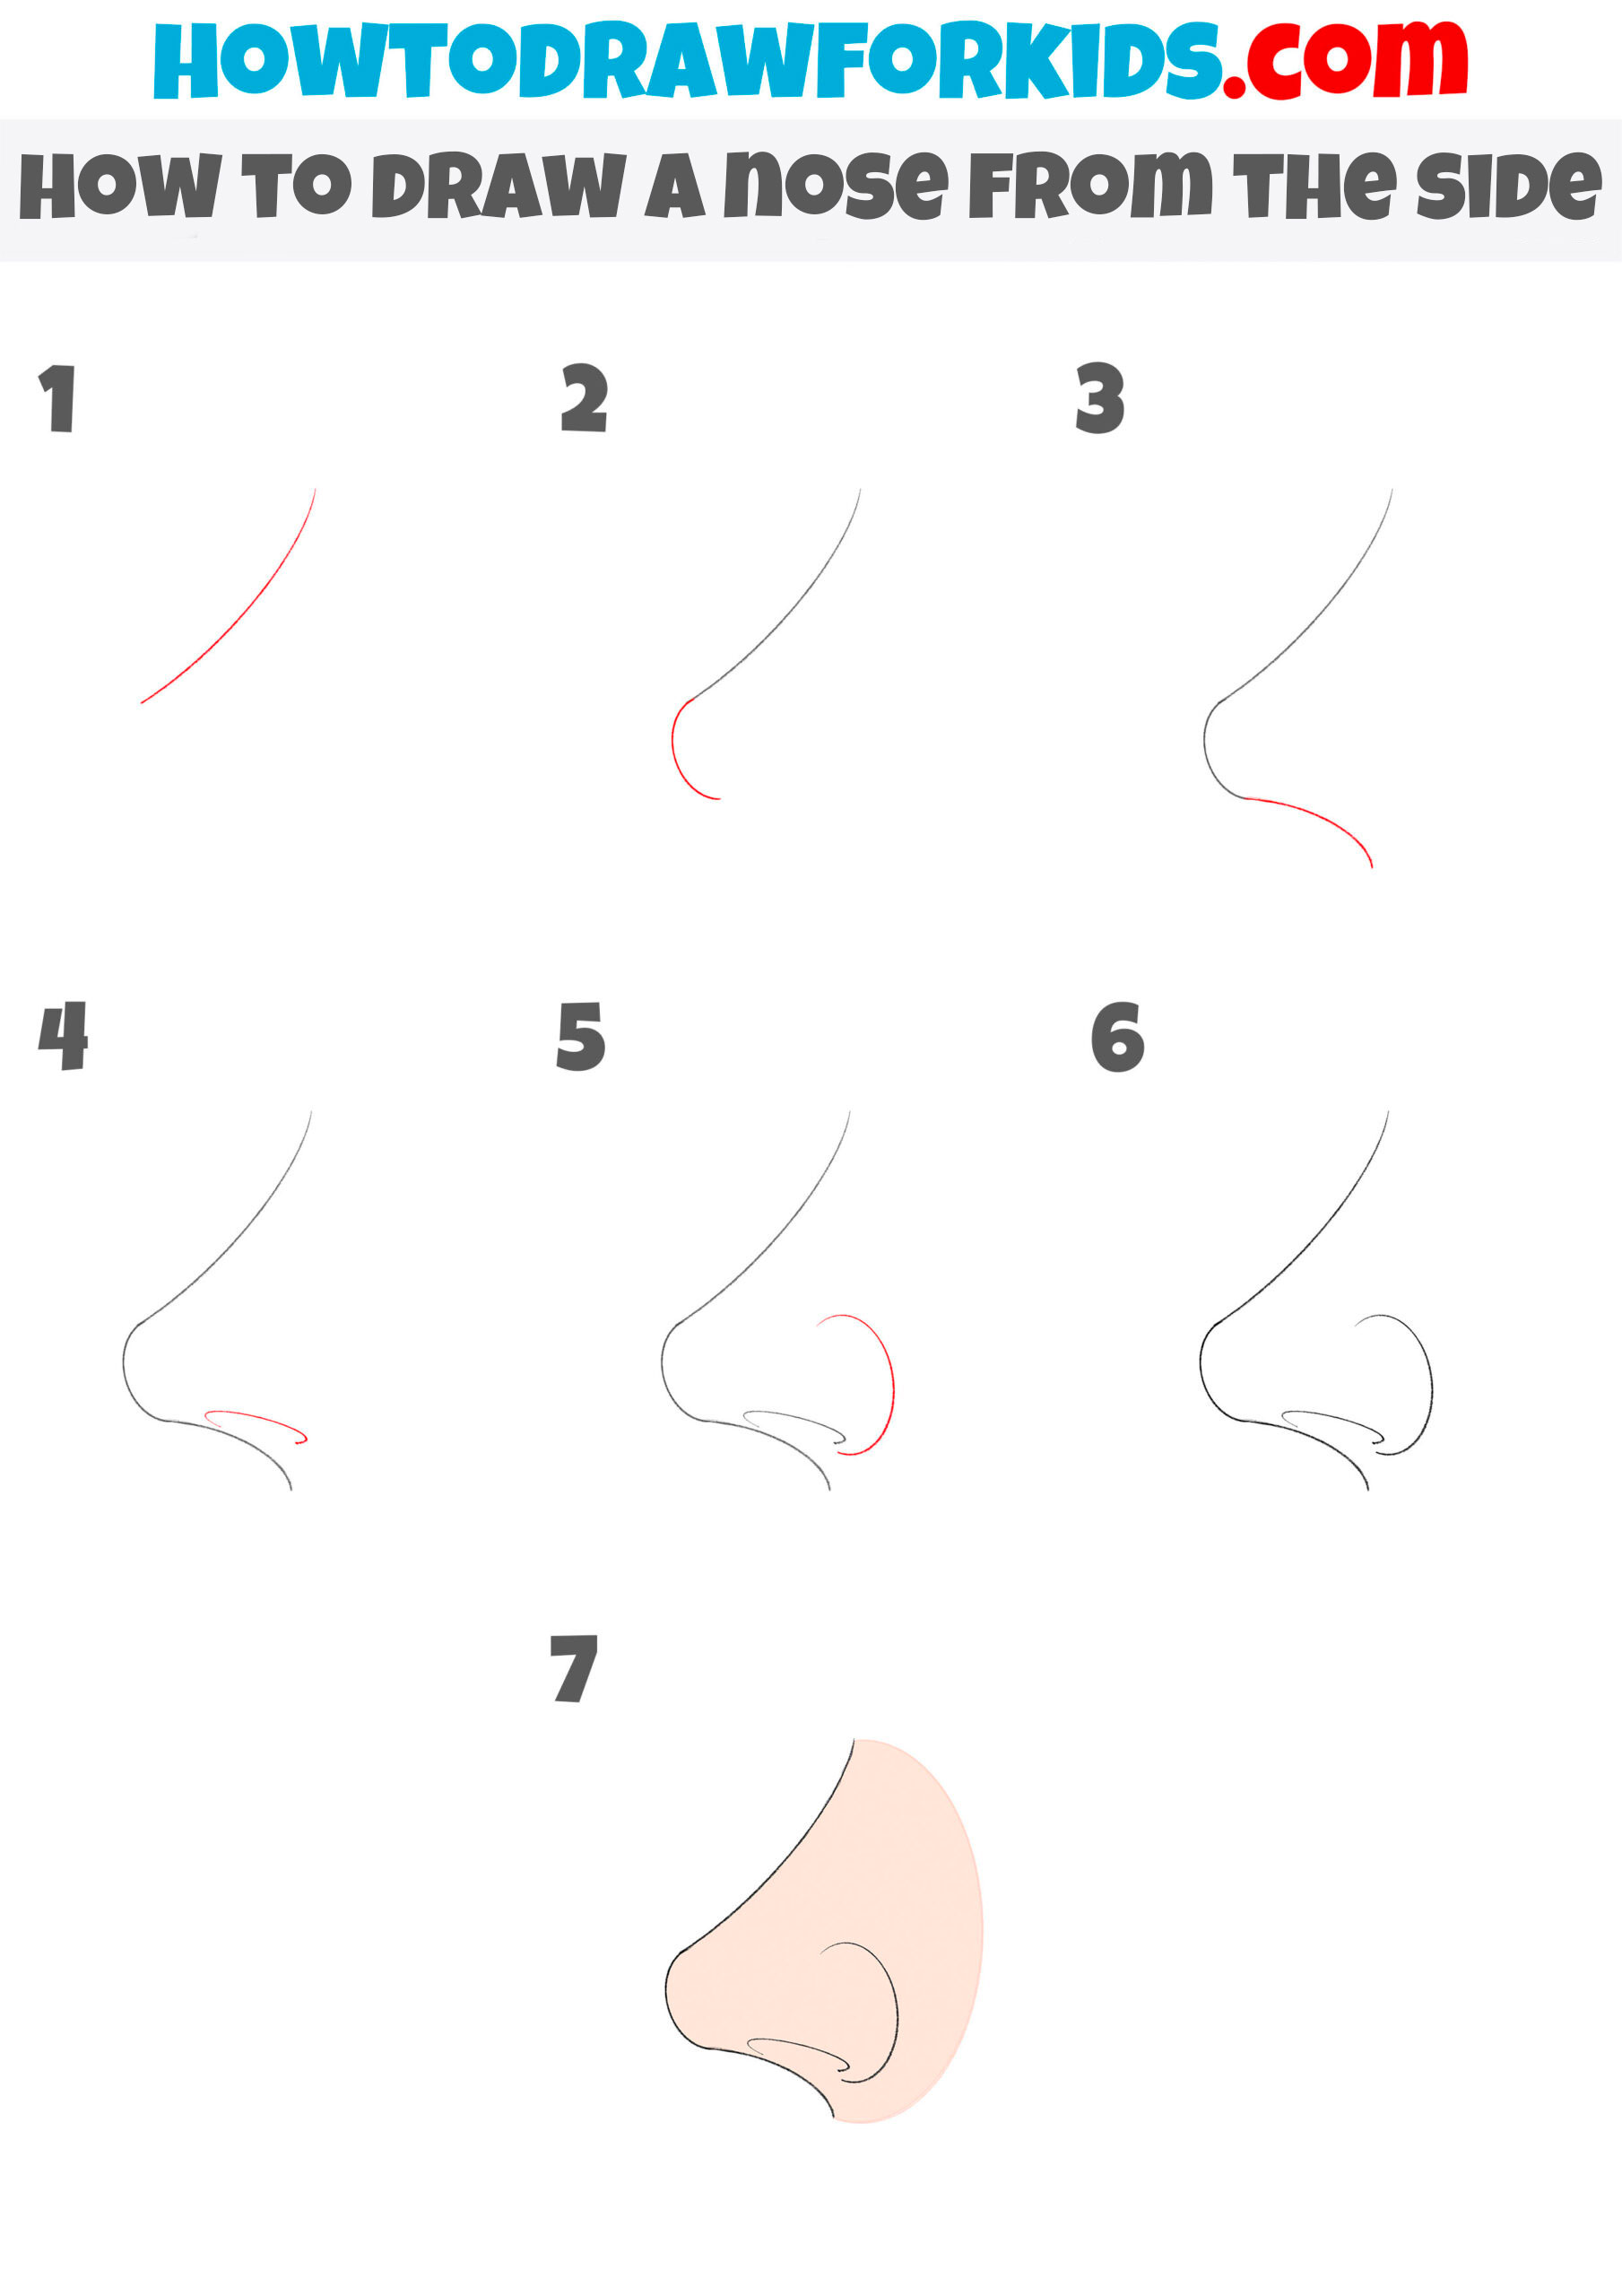 how to draw a nose from the side